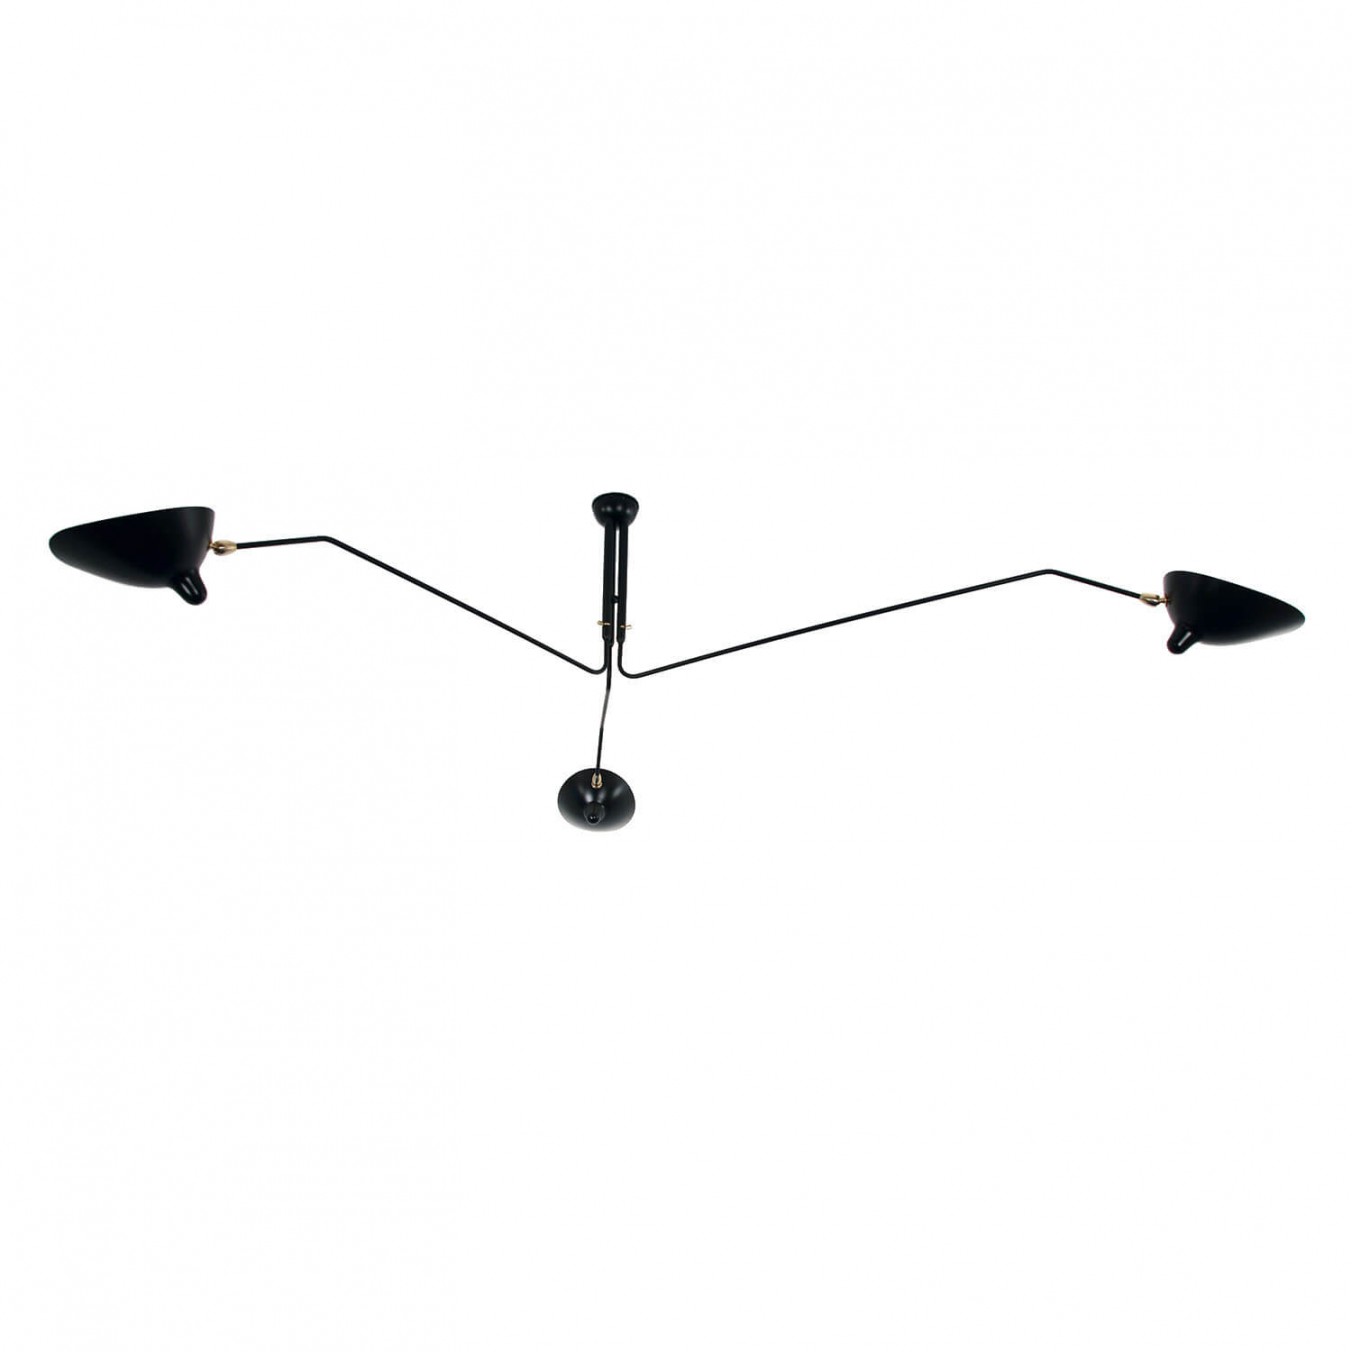 Ceiling Light with 3 pivoting arms